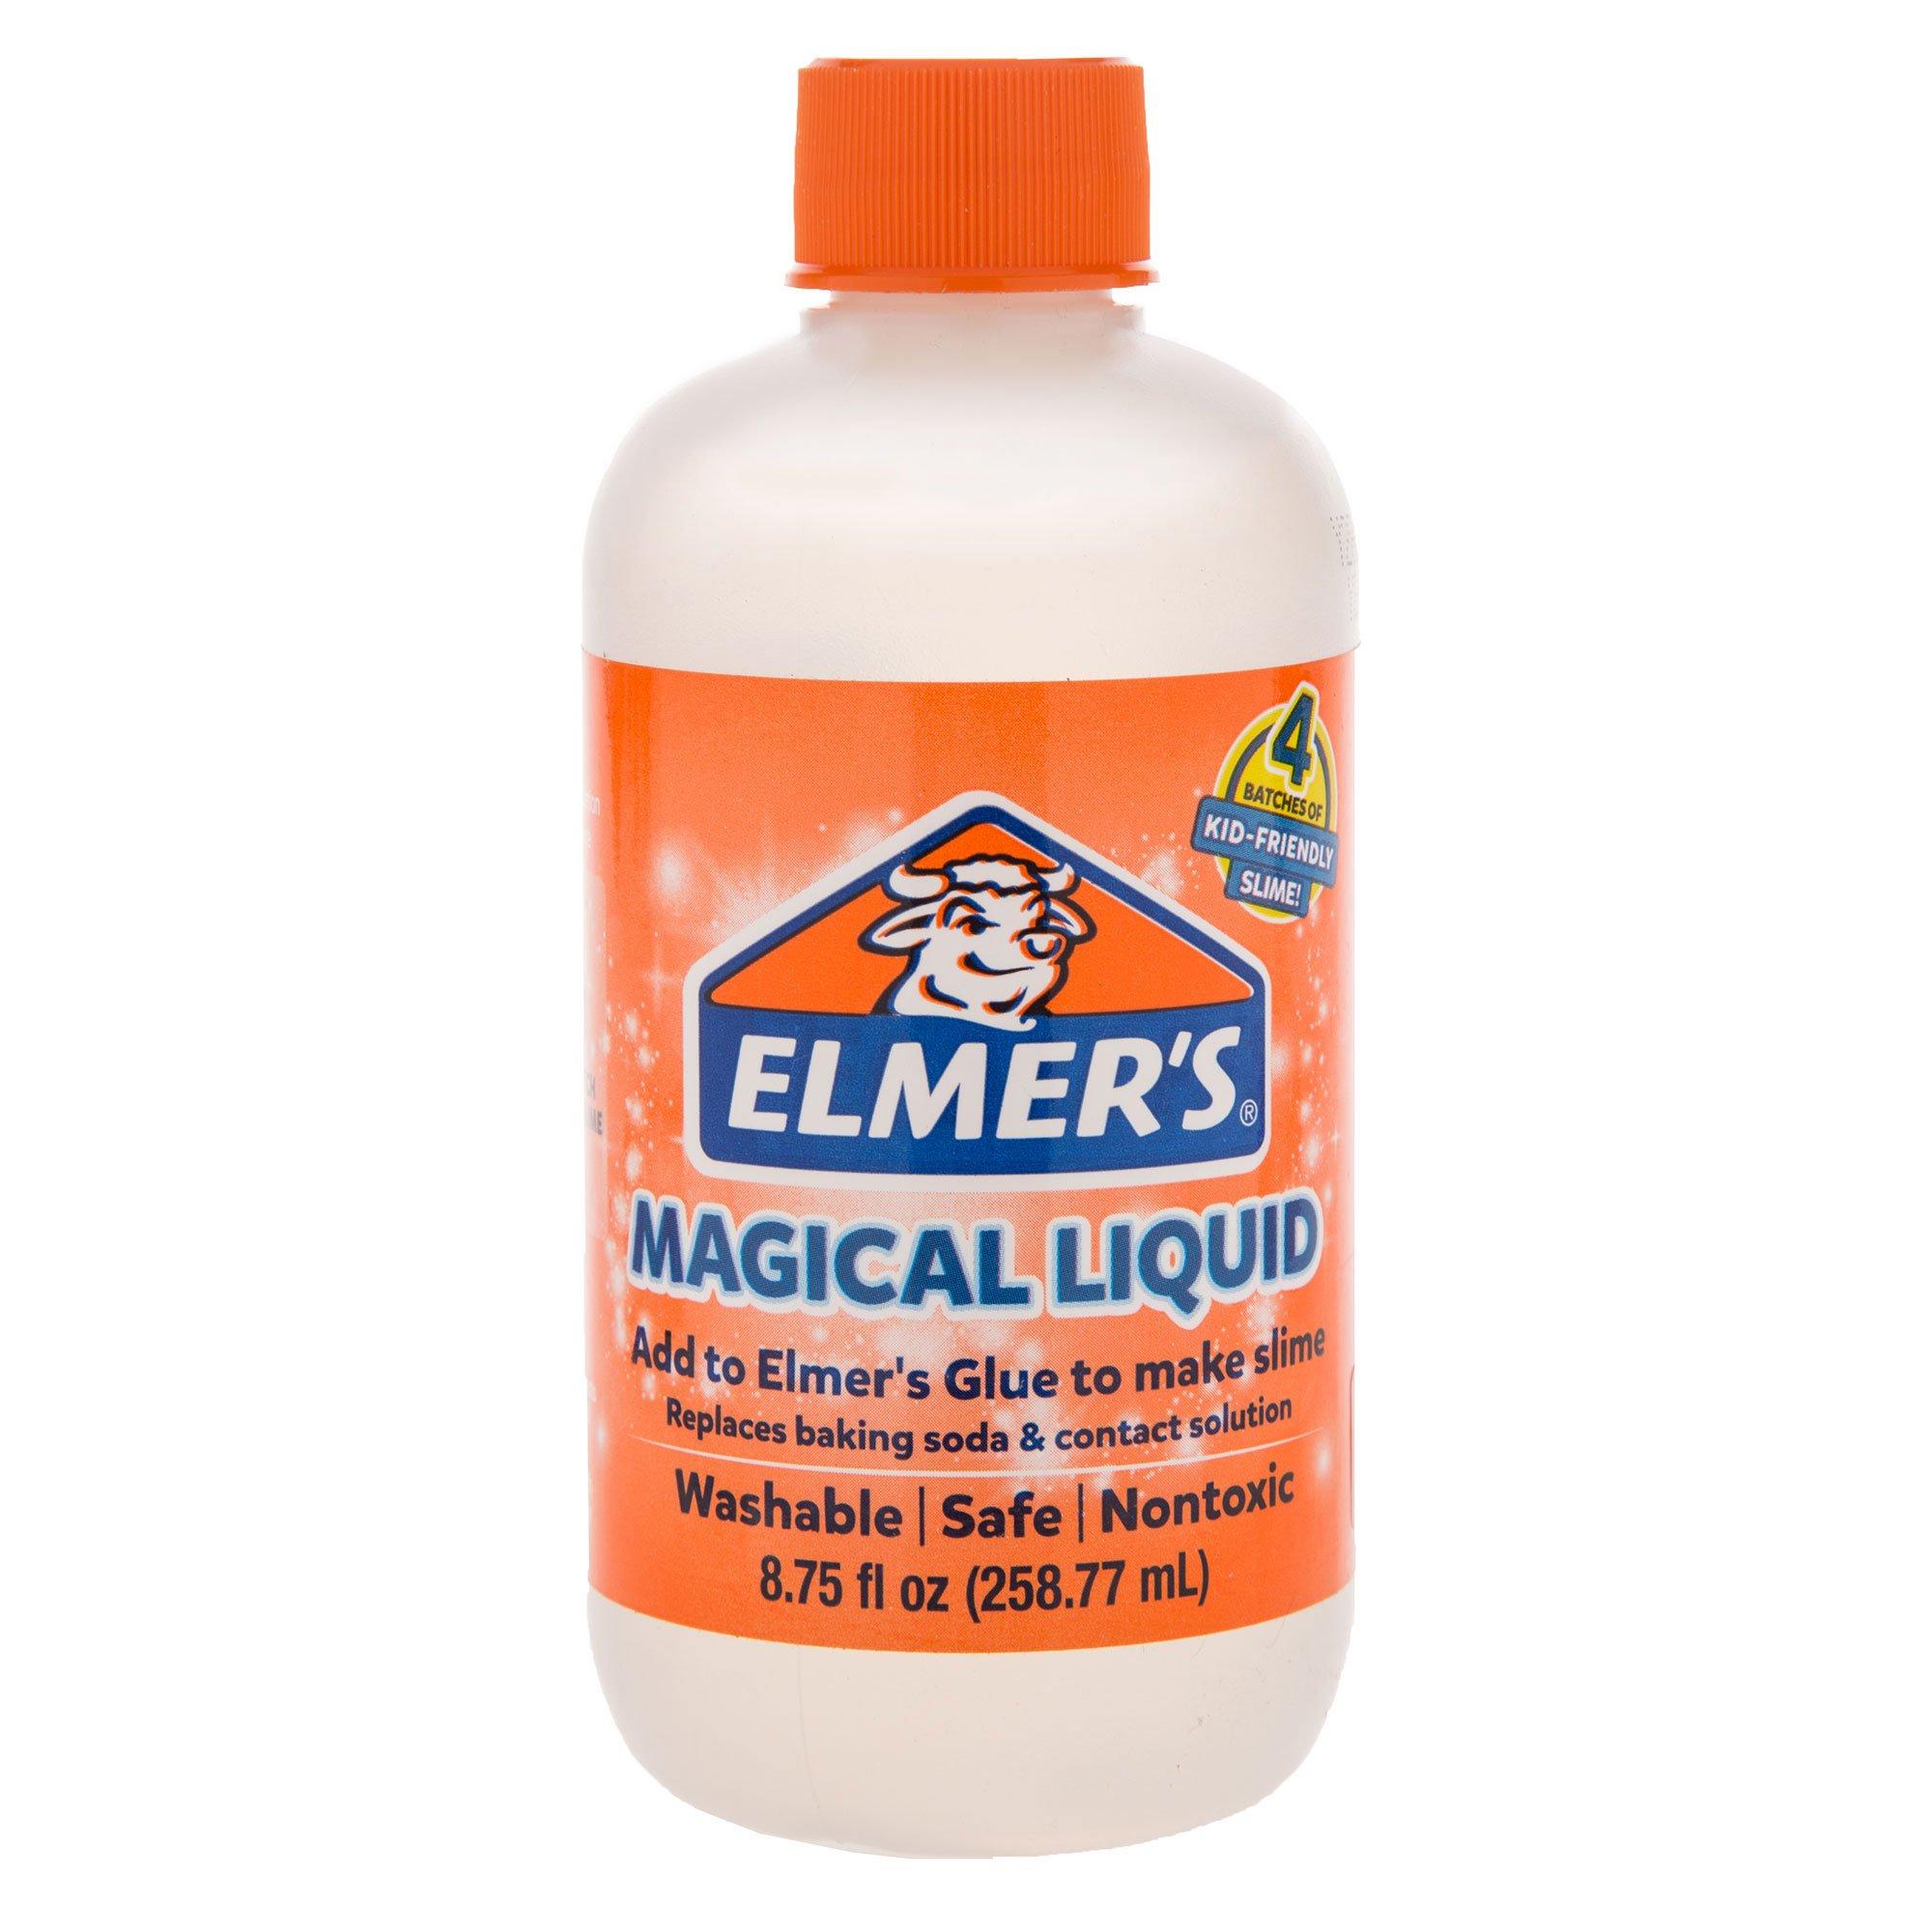  Elmer's Liquid Glitter Glue, Great For Making Slime, Washable,  Assorted Colors, 6 Ounces Each, 3 Count : General Purpose Glues : Arts,  Crafts & Sewing